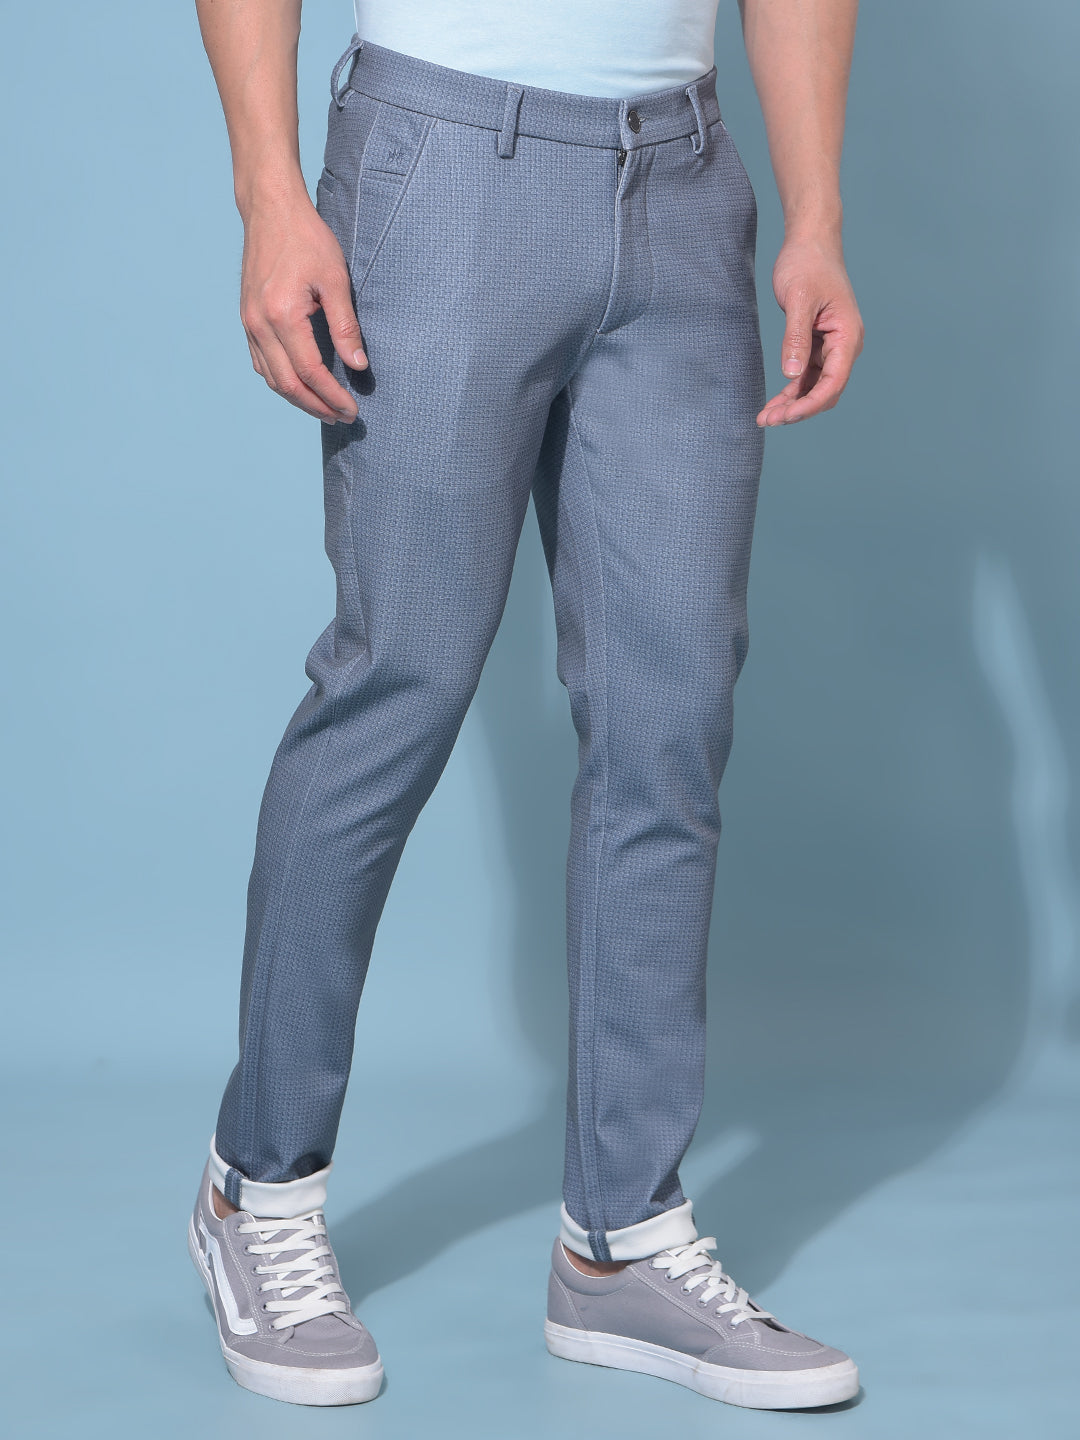 Grey Stretchable Printed Trousers-Men Trousers-Crimsoune Club